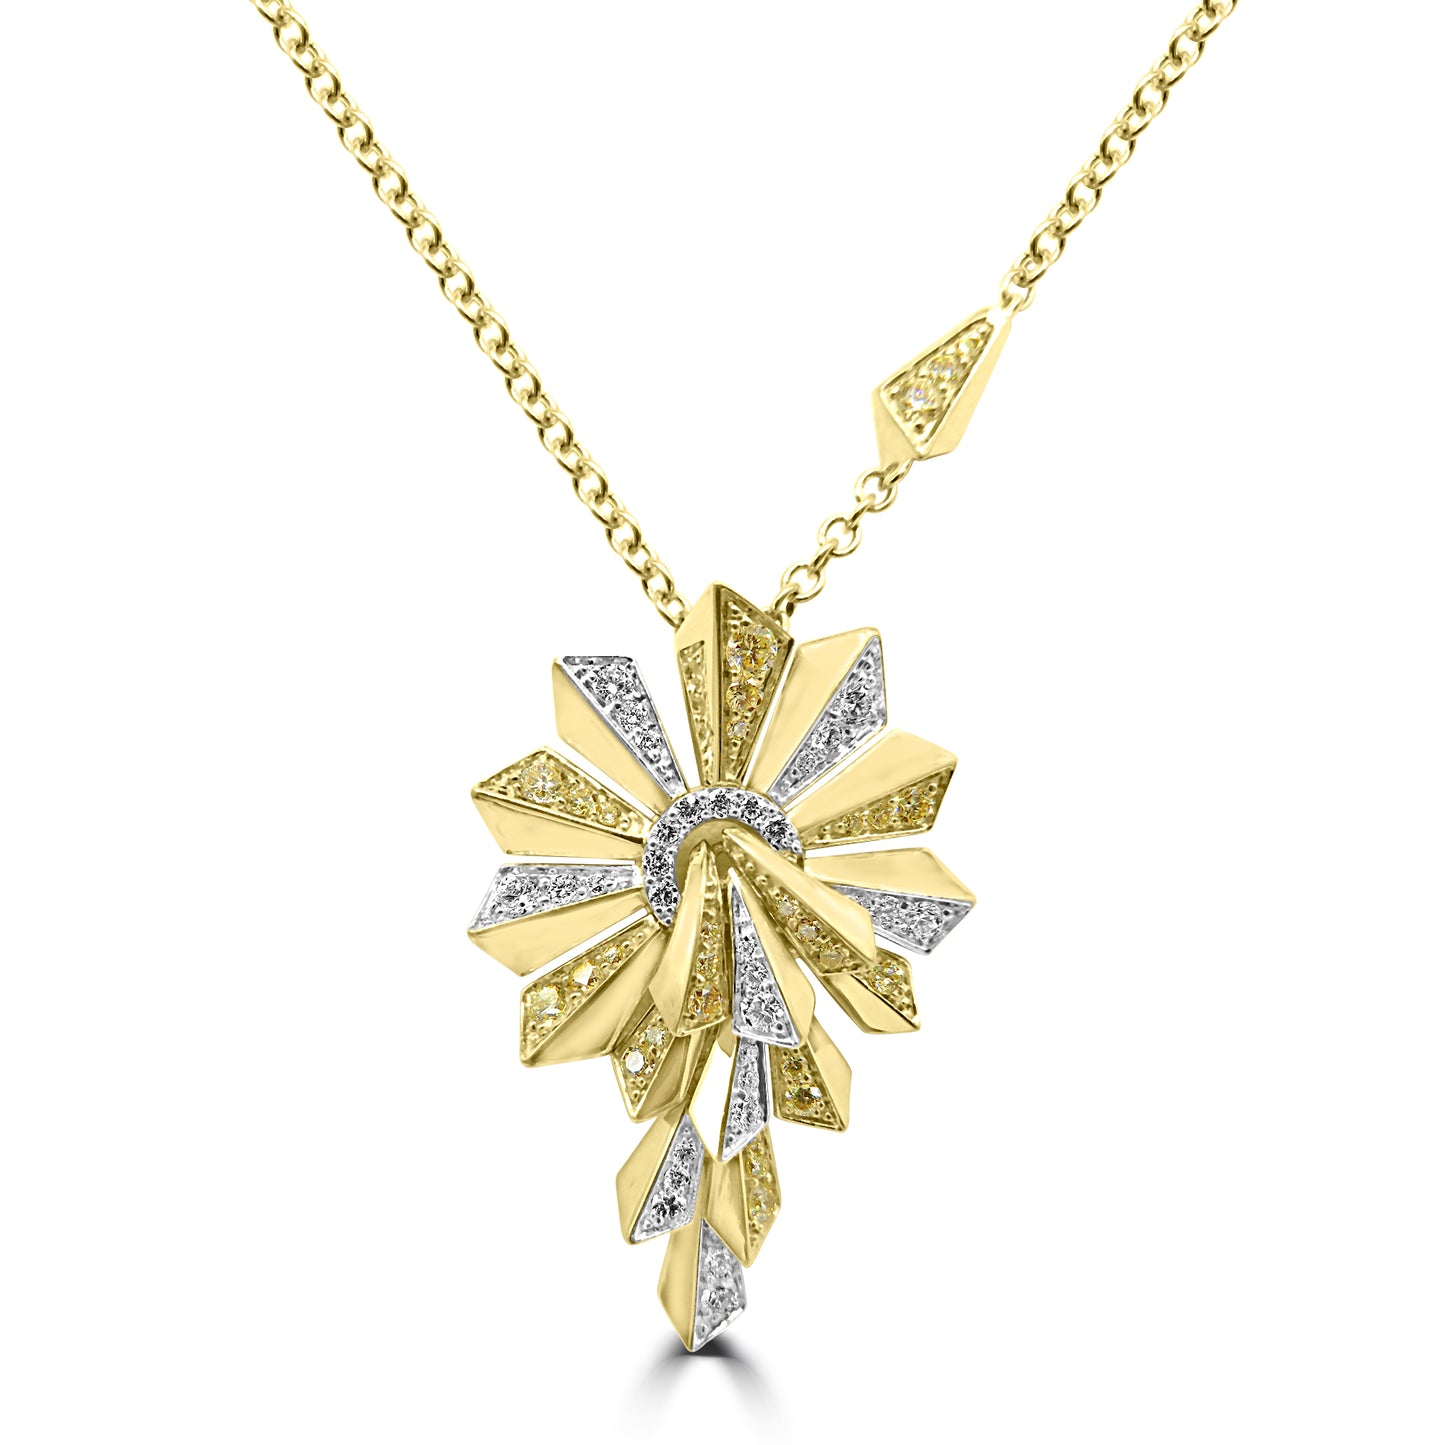 Gold and Diamond Necklace from Music Series